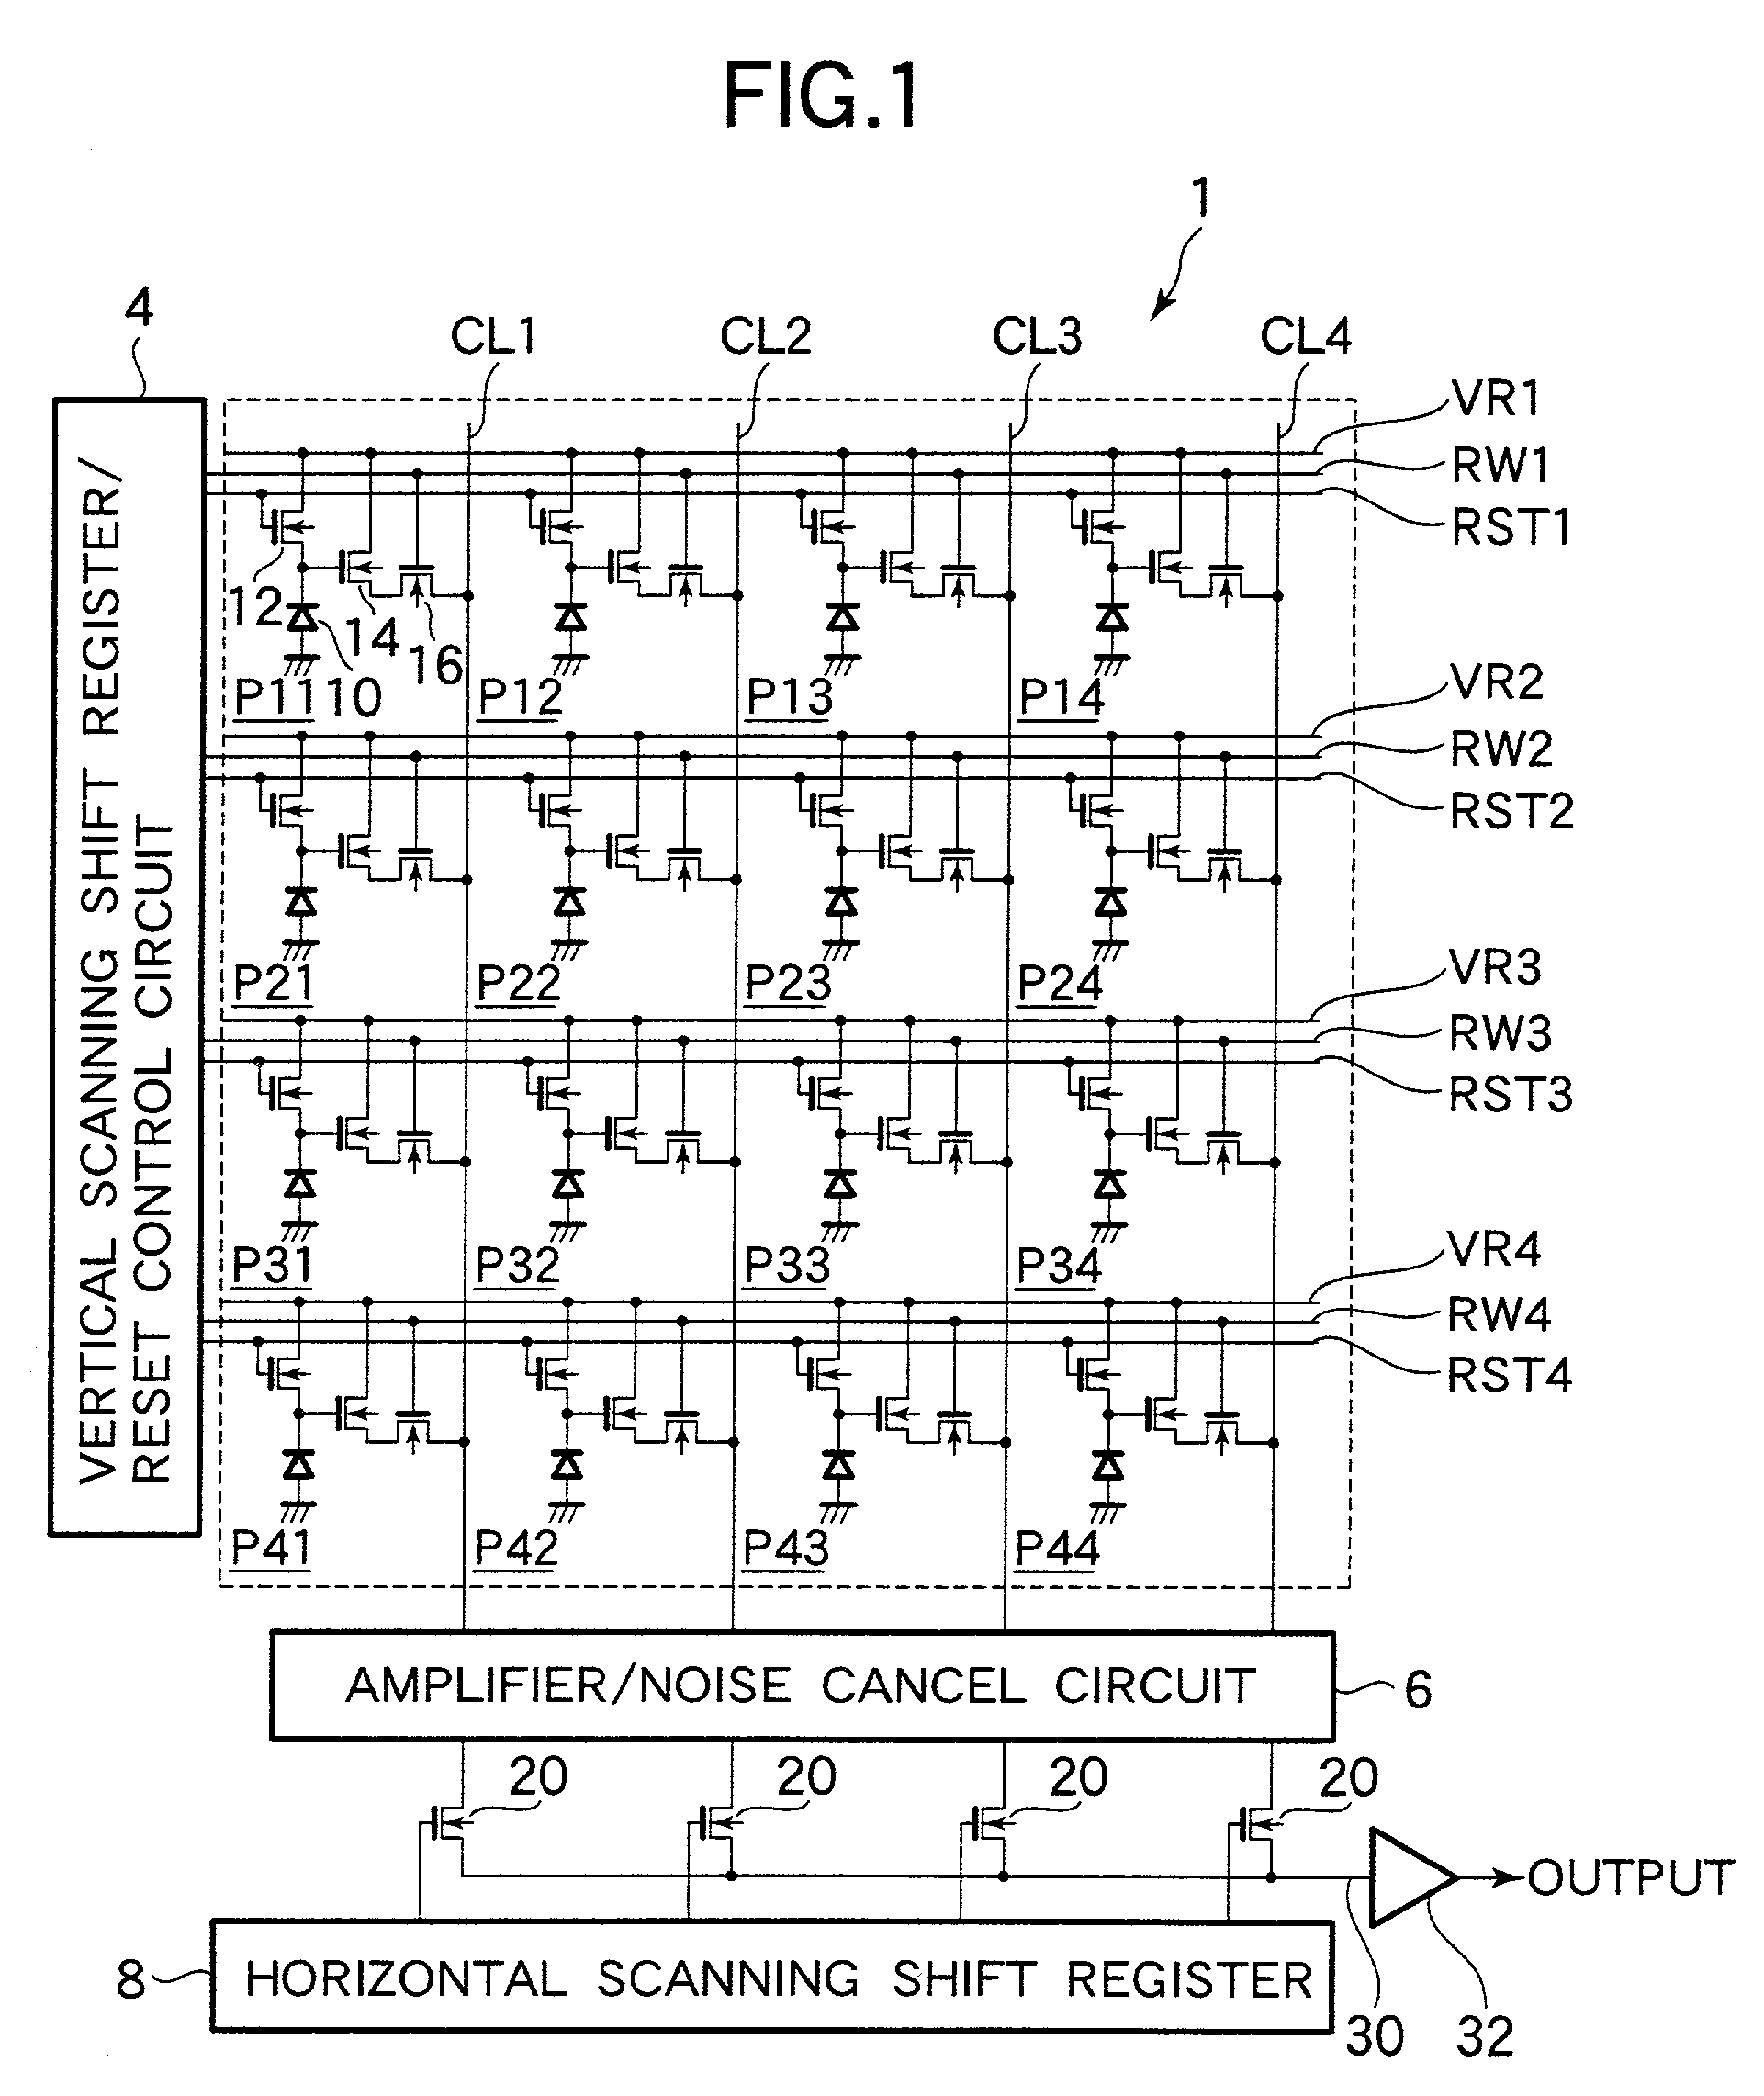 X-Y address type solid-state image pickup device with an image averaging circuit disposed in the noise cancel circuit